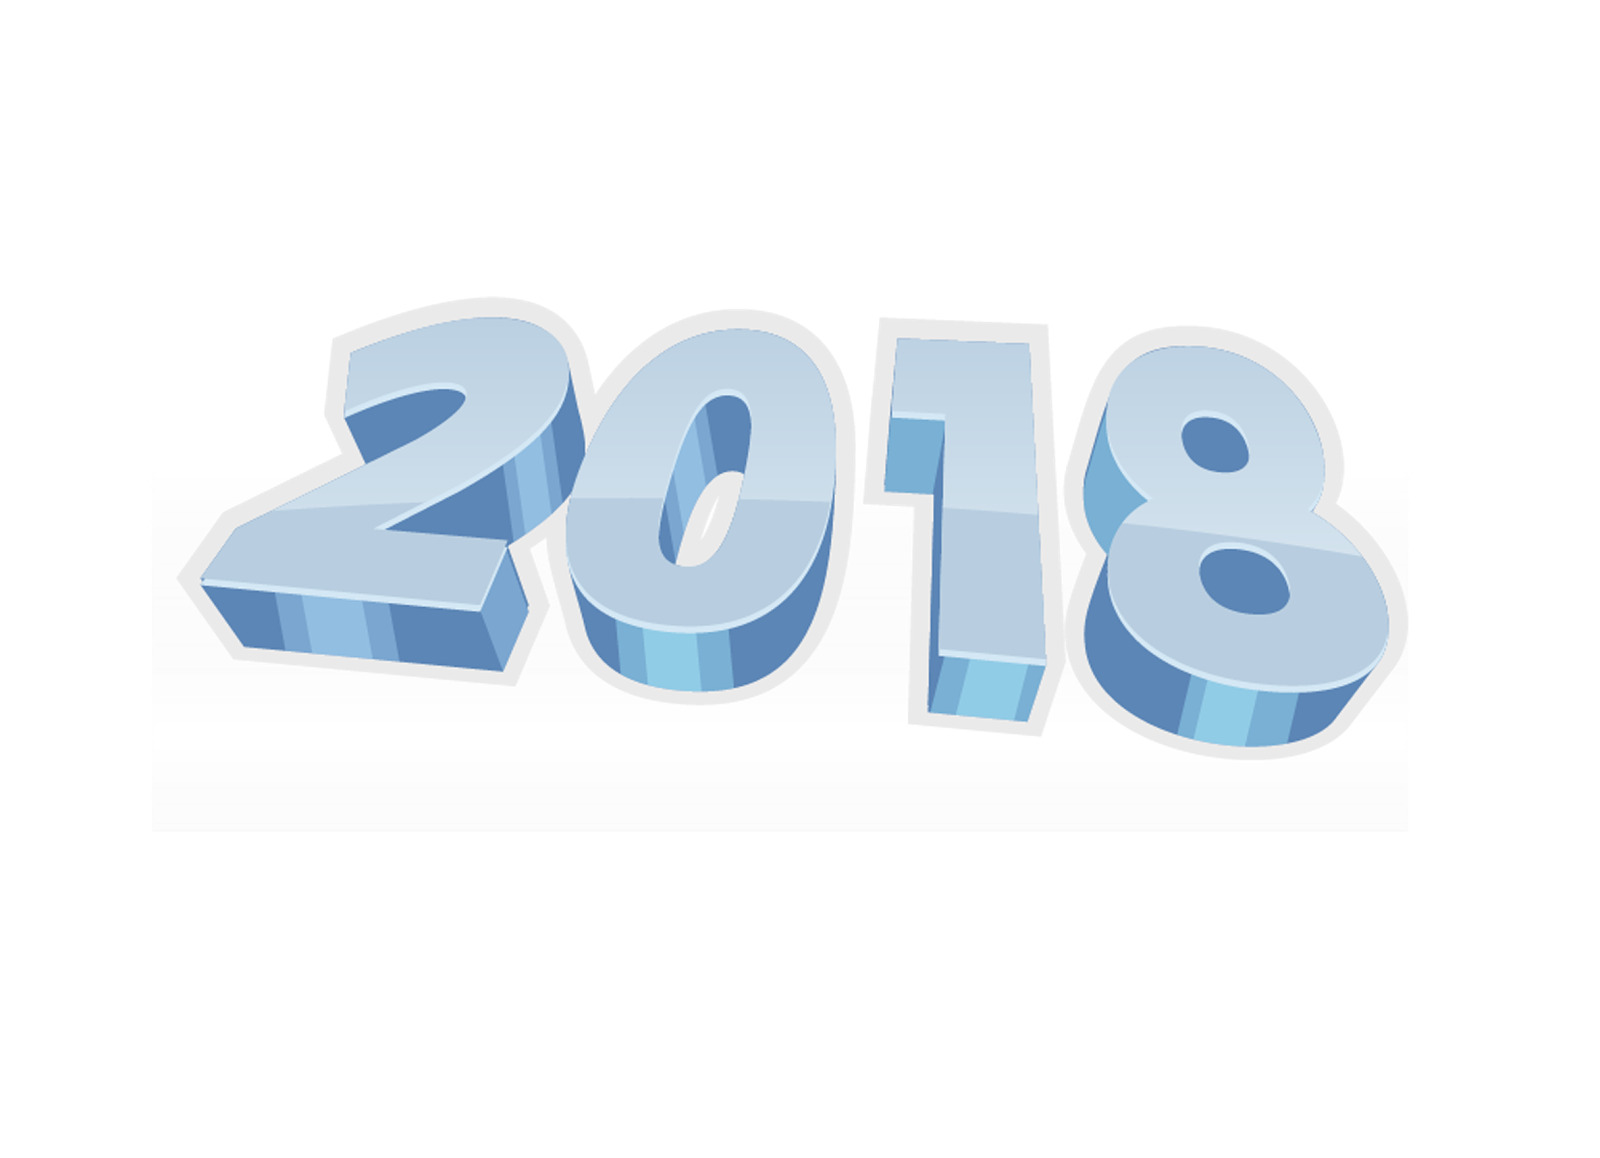 2018 NEW YEAR BACKGROUNDS 2 PNGs 2018 HAPPY NEW YEAR TEXT PNG